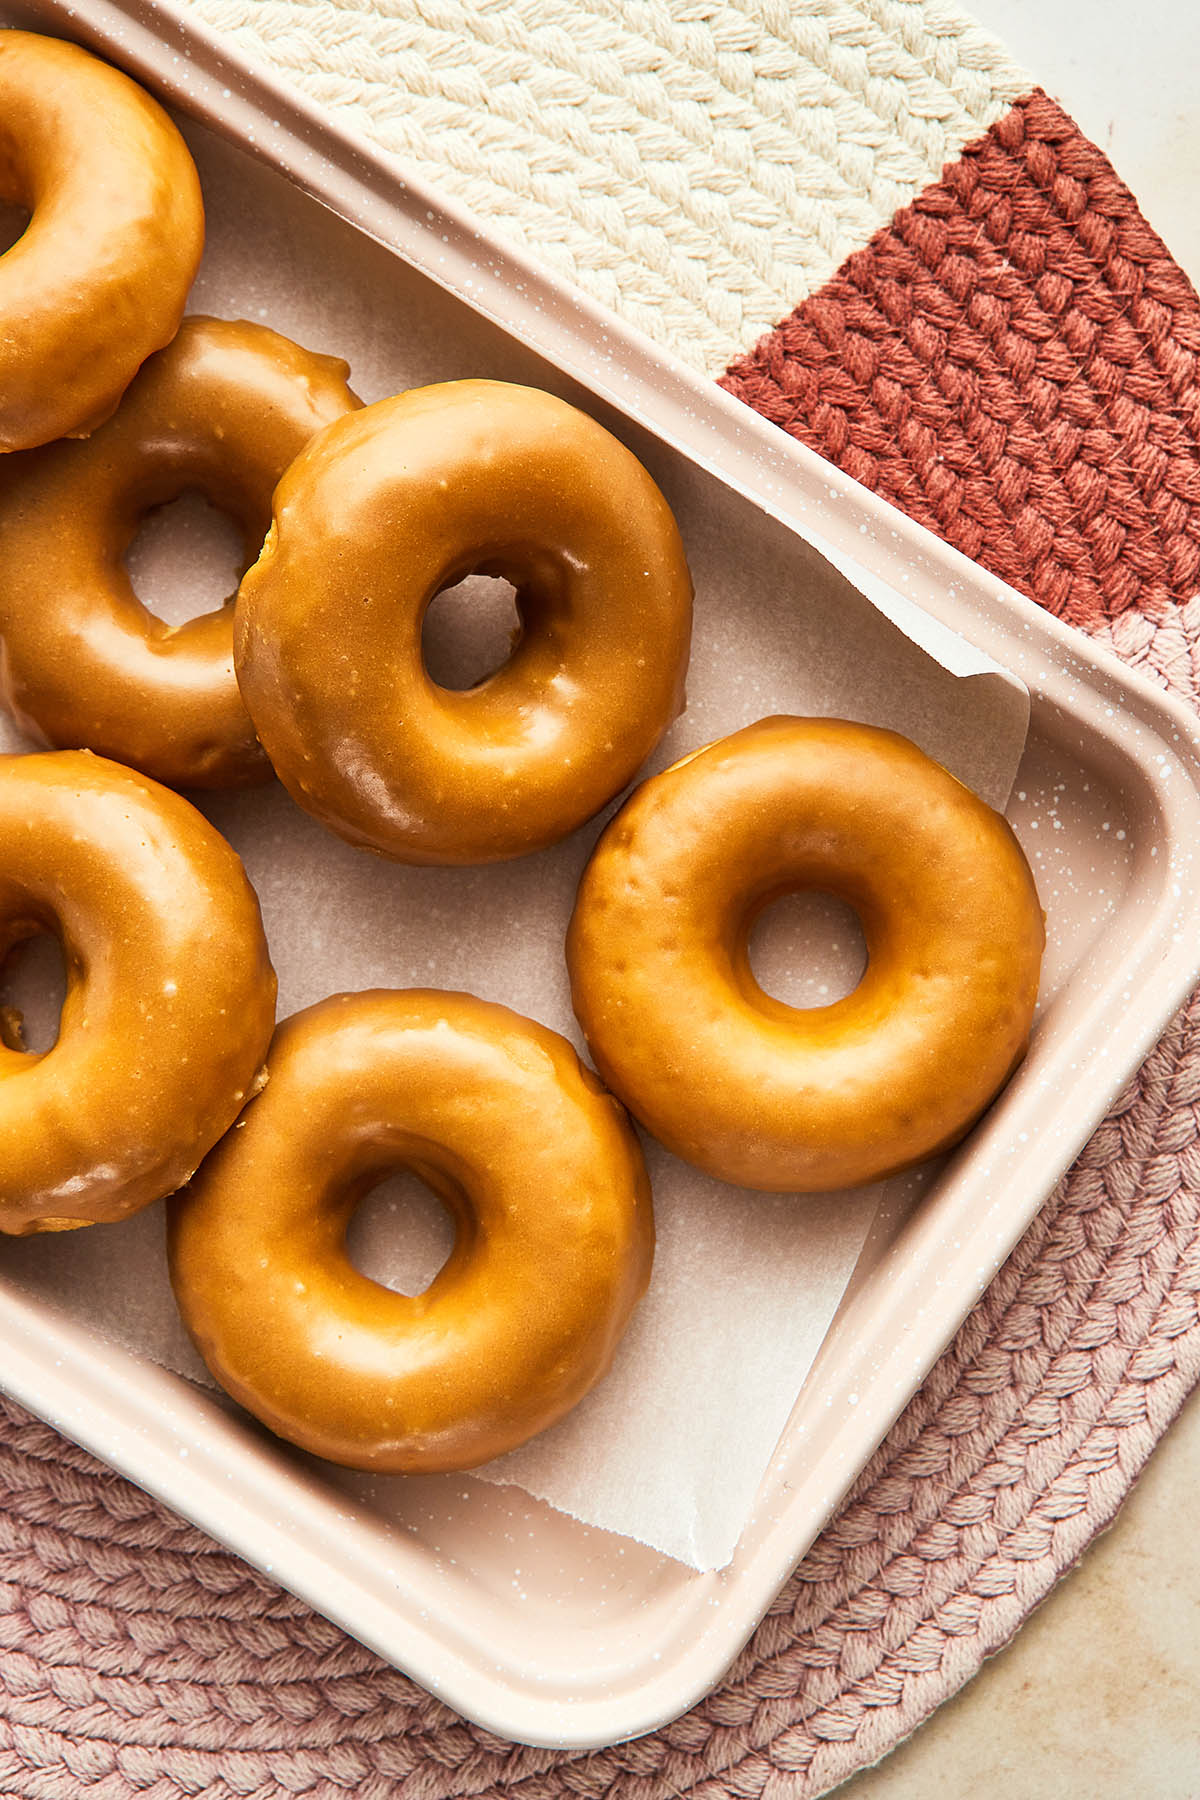 A pan of oven-baked maple glazed donuts.